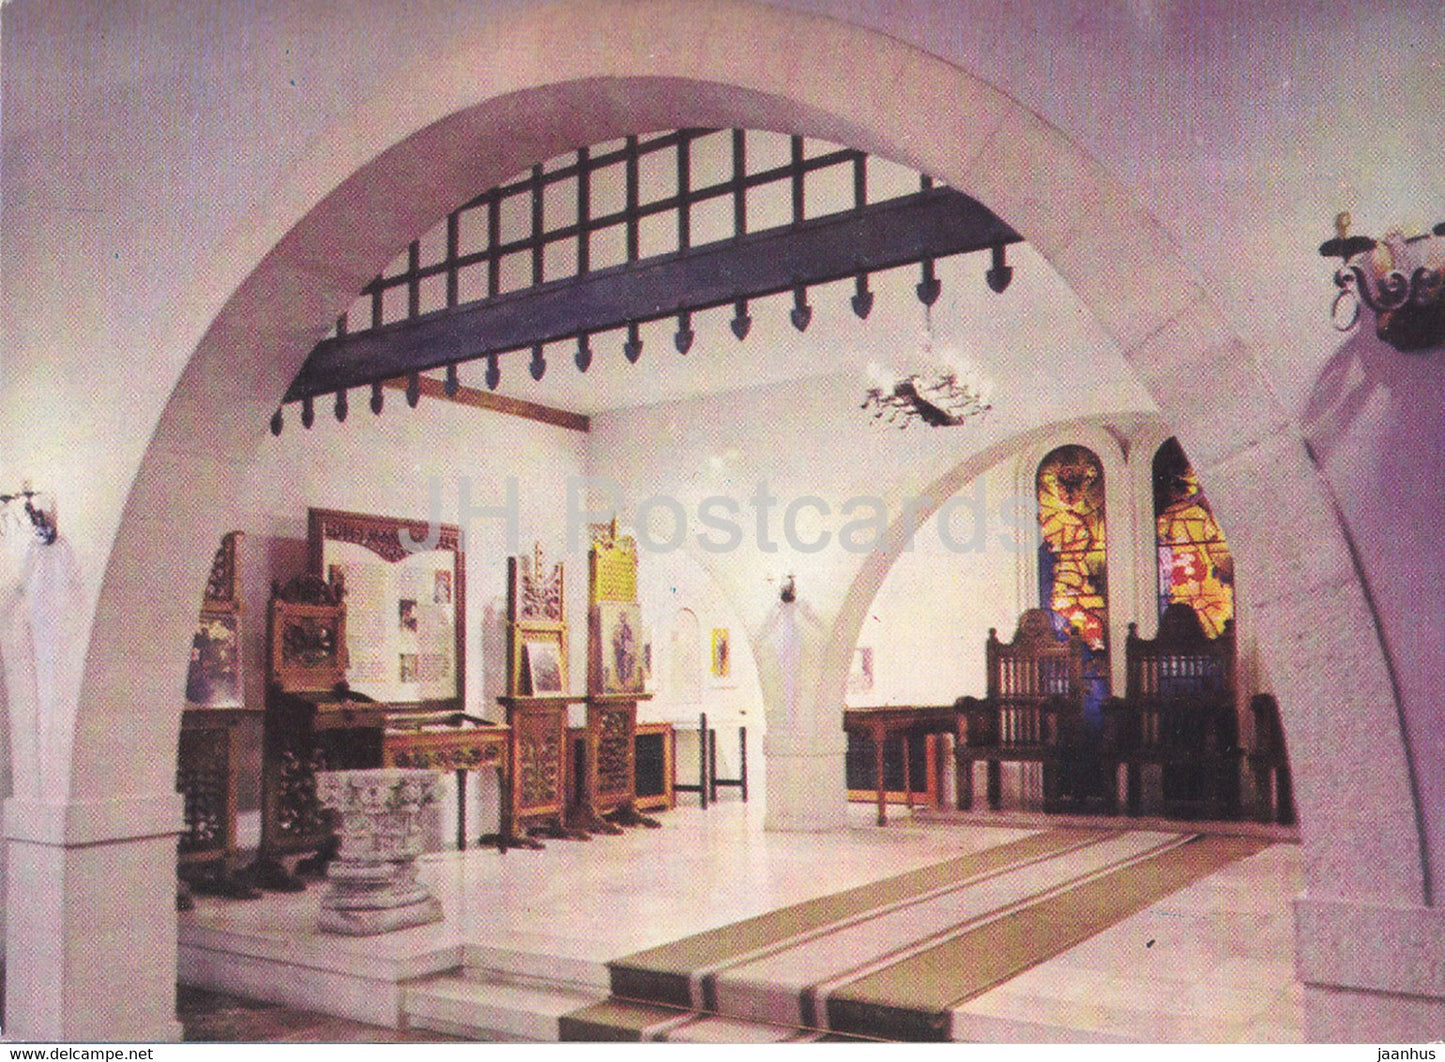 The National Museum Gjergj Kastrioti Scanderbeg - View of the Hall - Heritage from the Middle Ages -  Albania - unused - JH Postcards